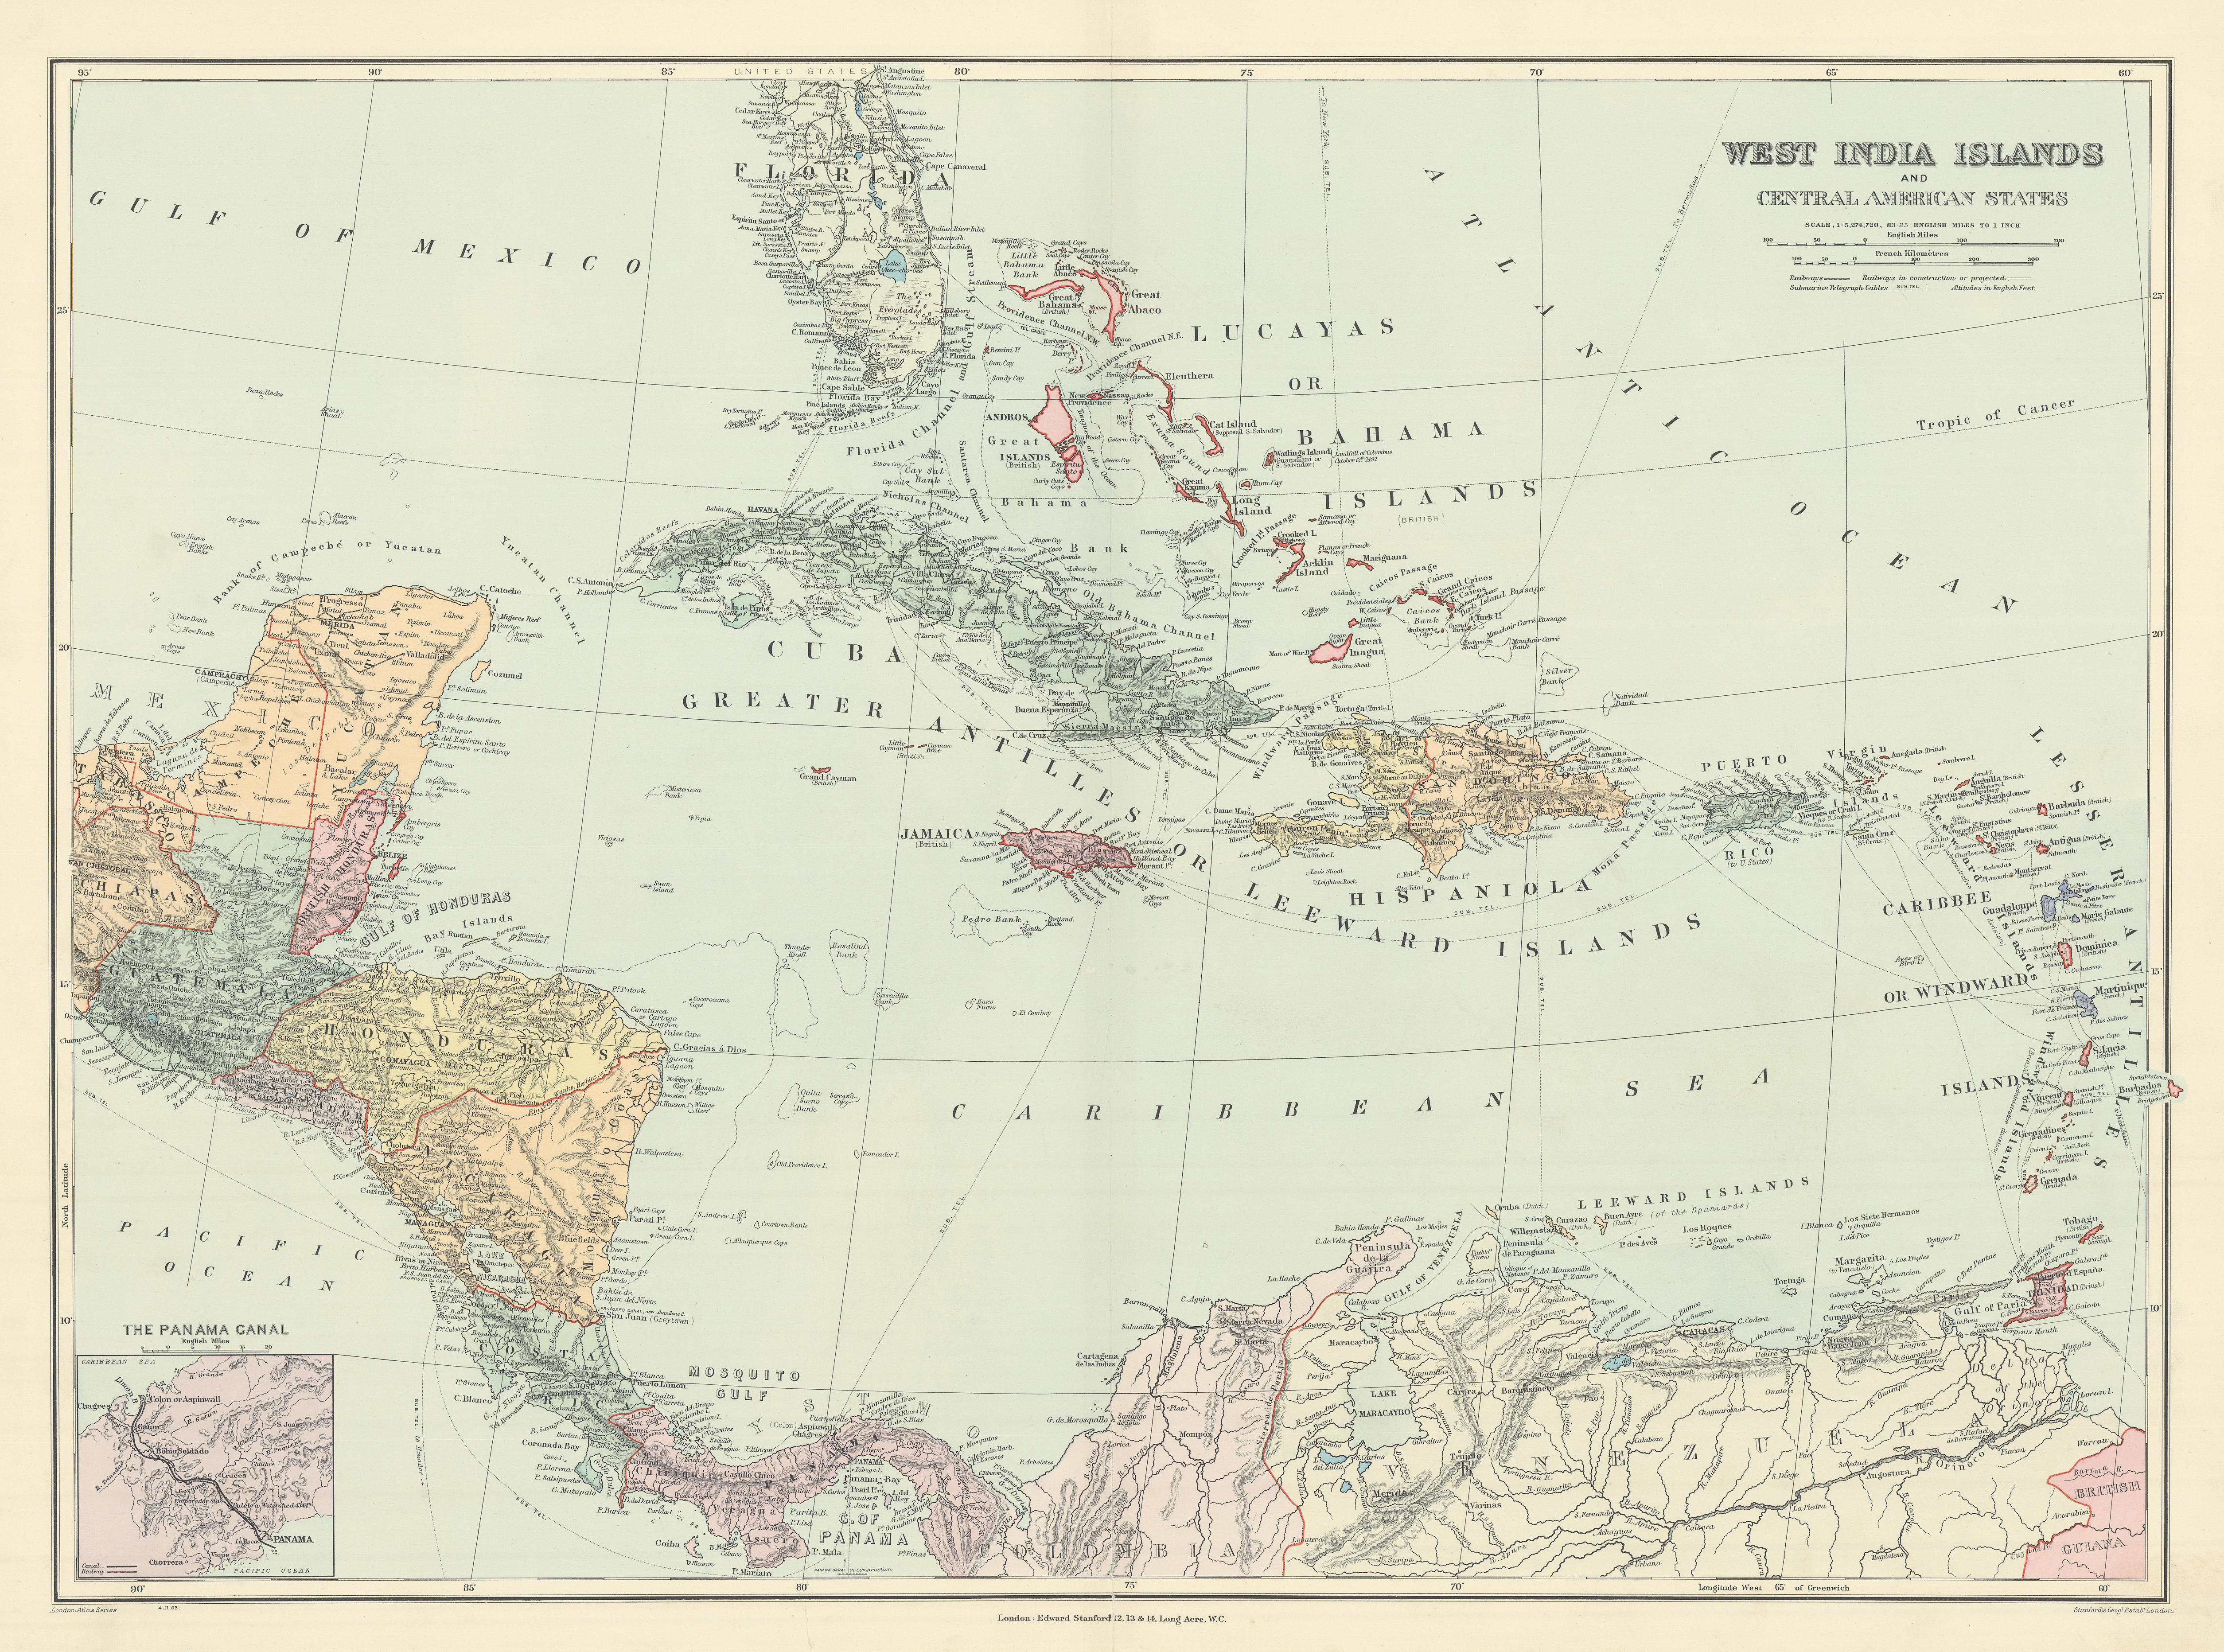 West India Islands & Central American States. Caribbean. STANFORD 1904 old map